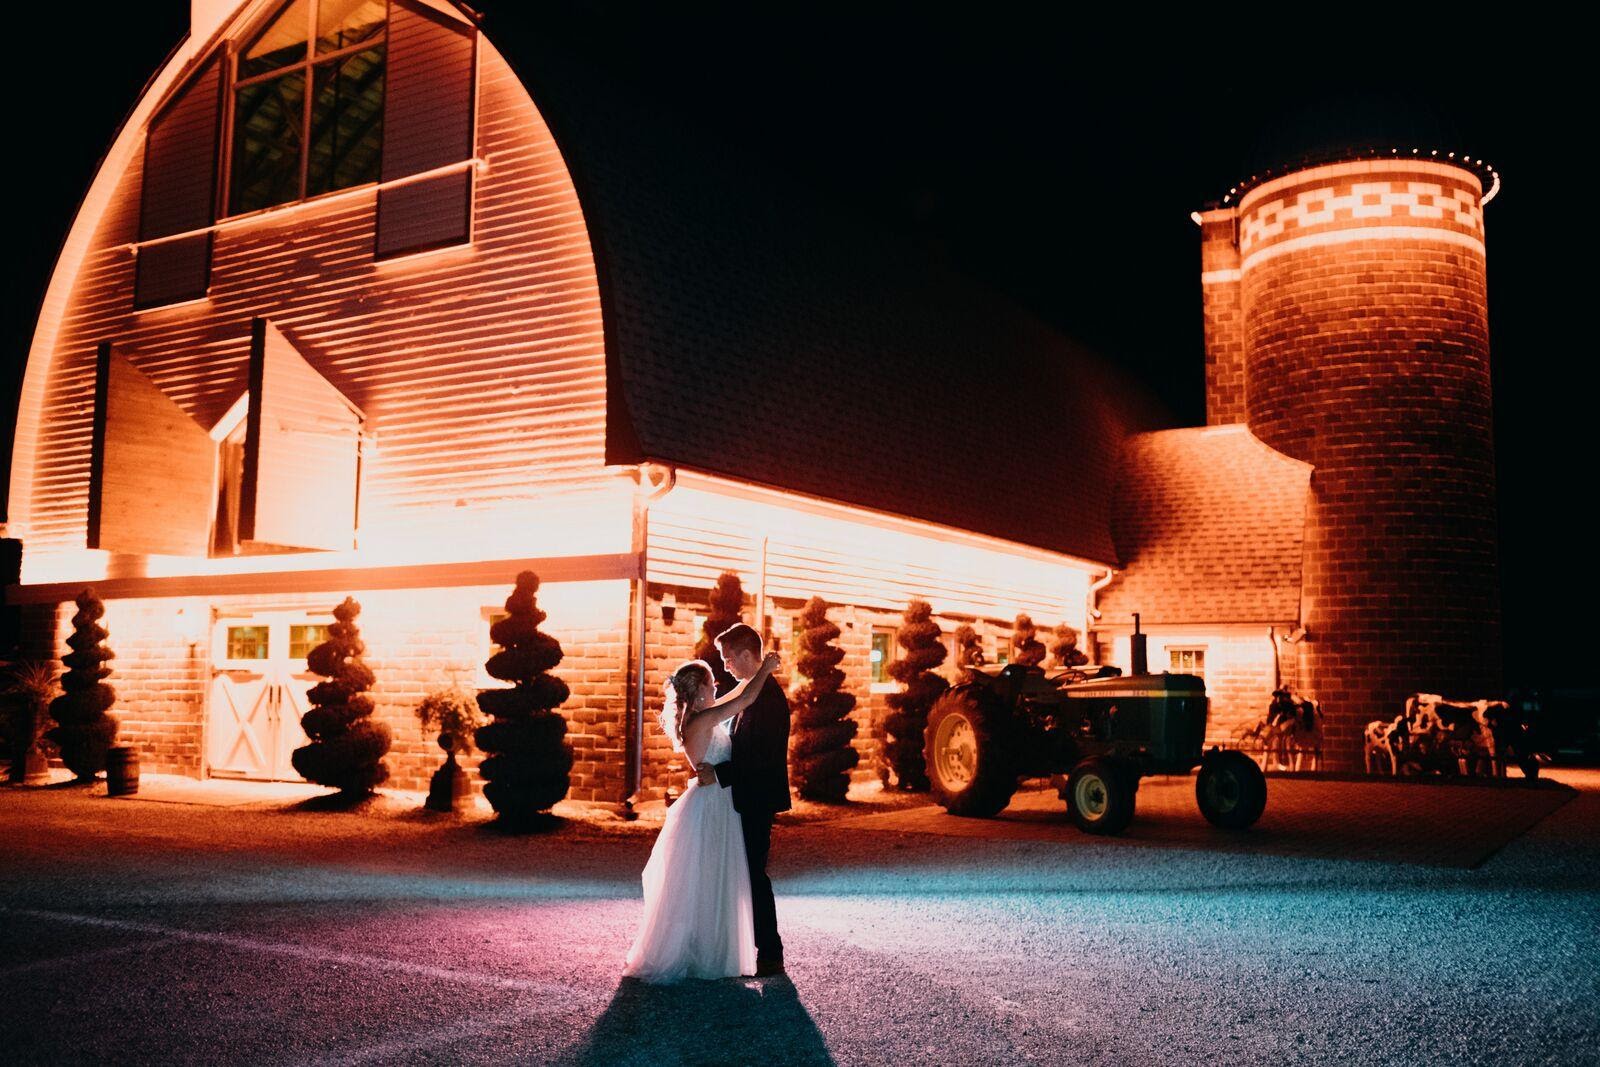 10 Questions to Ask When Touring a Wedding Venue